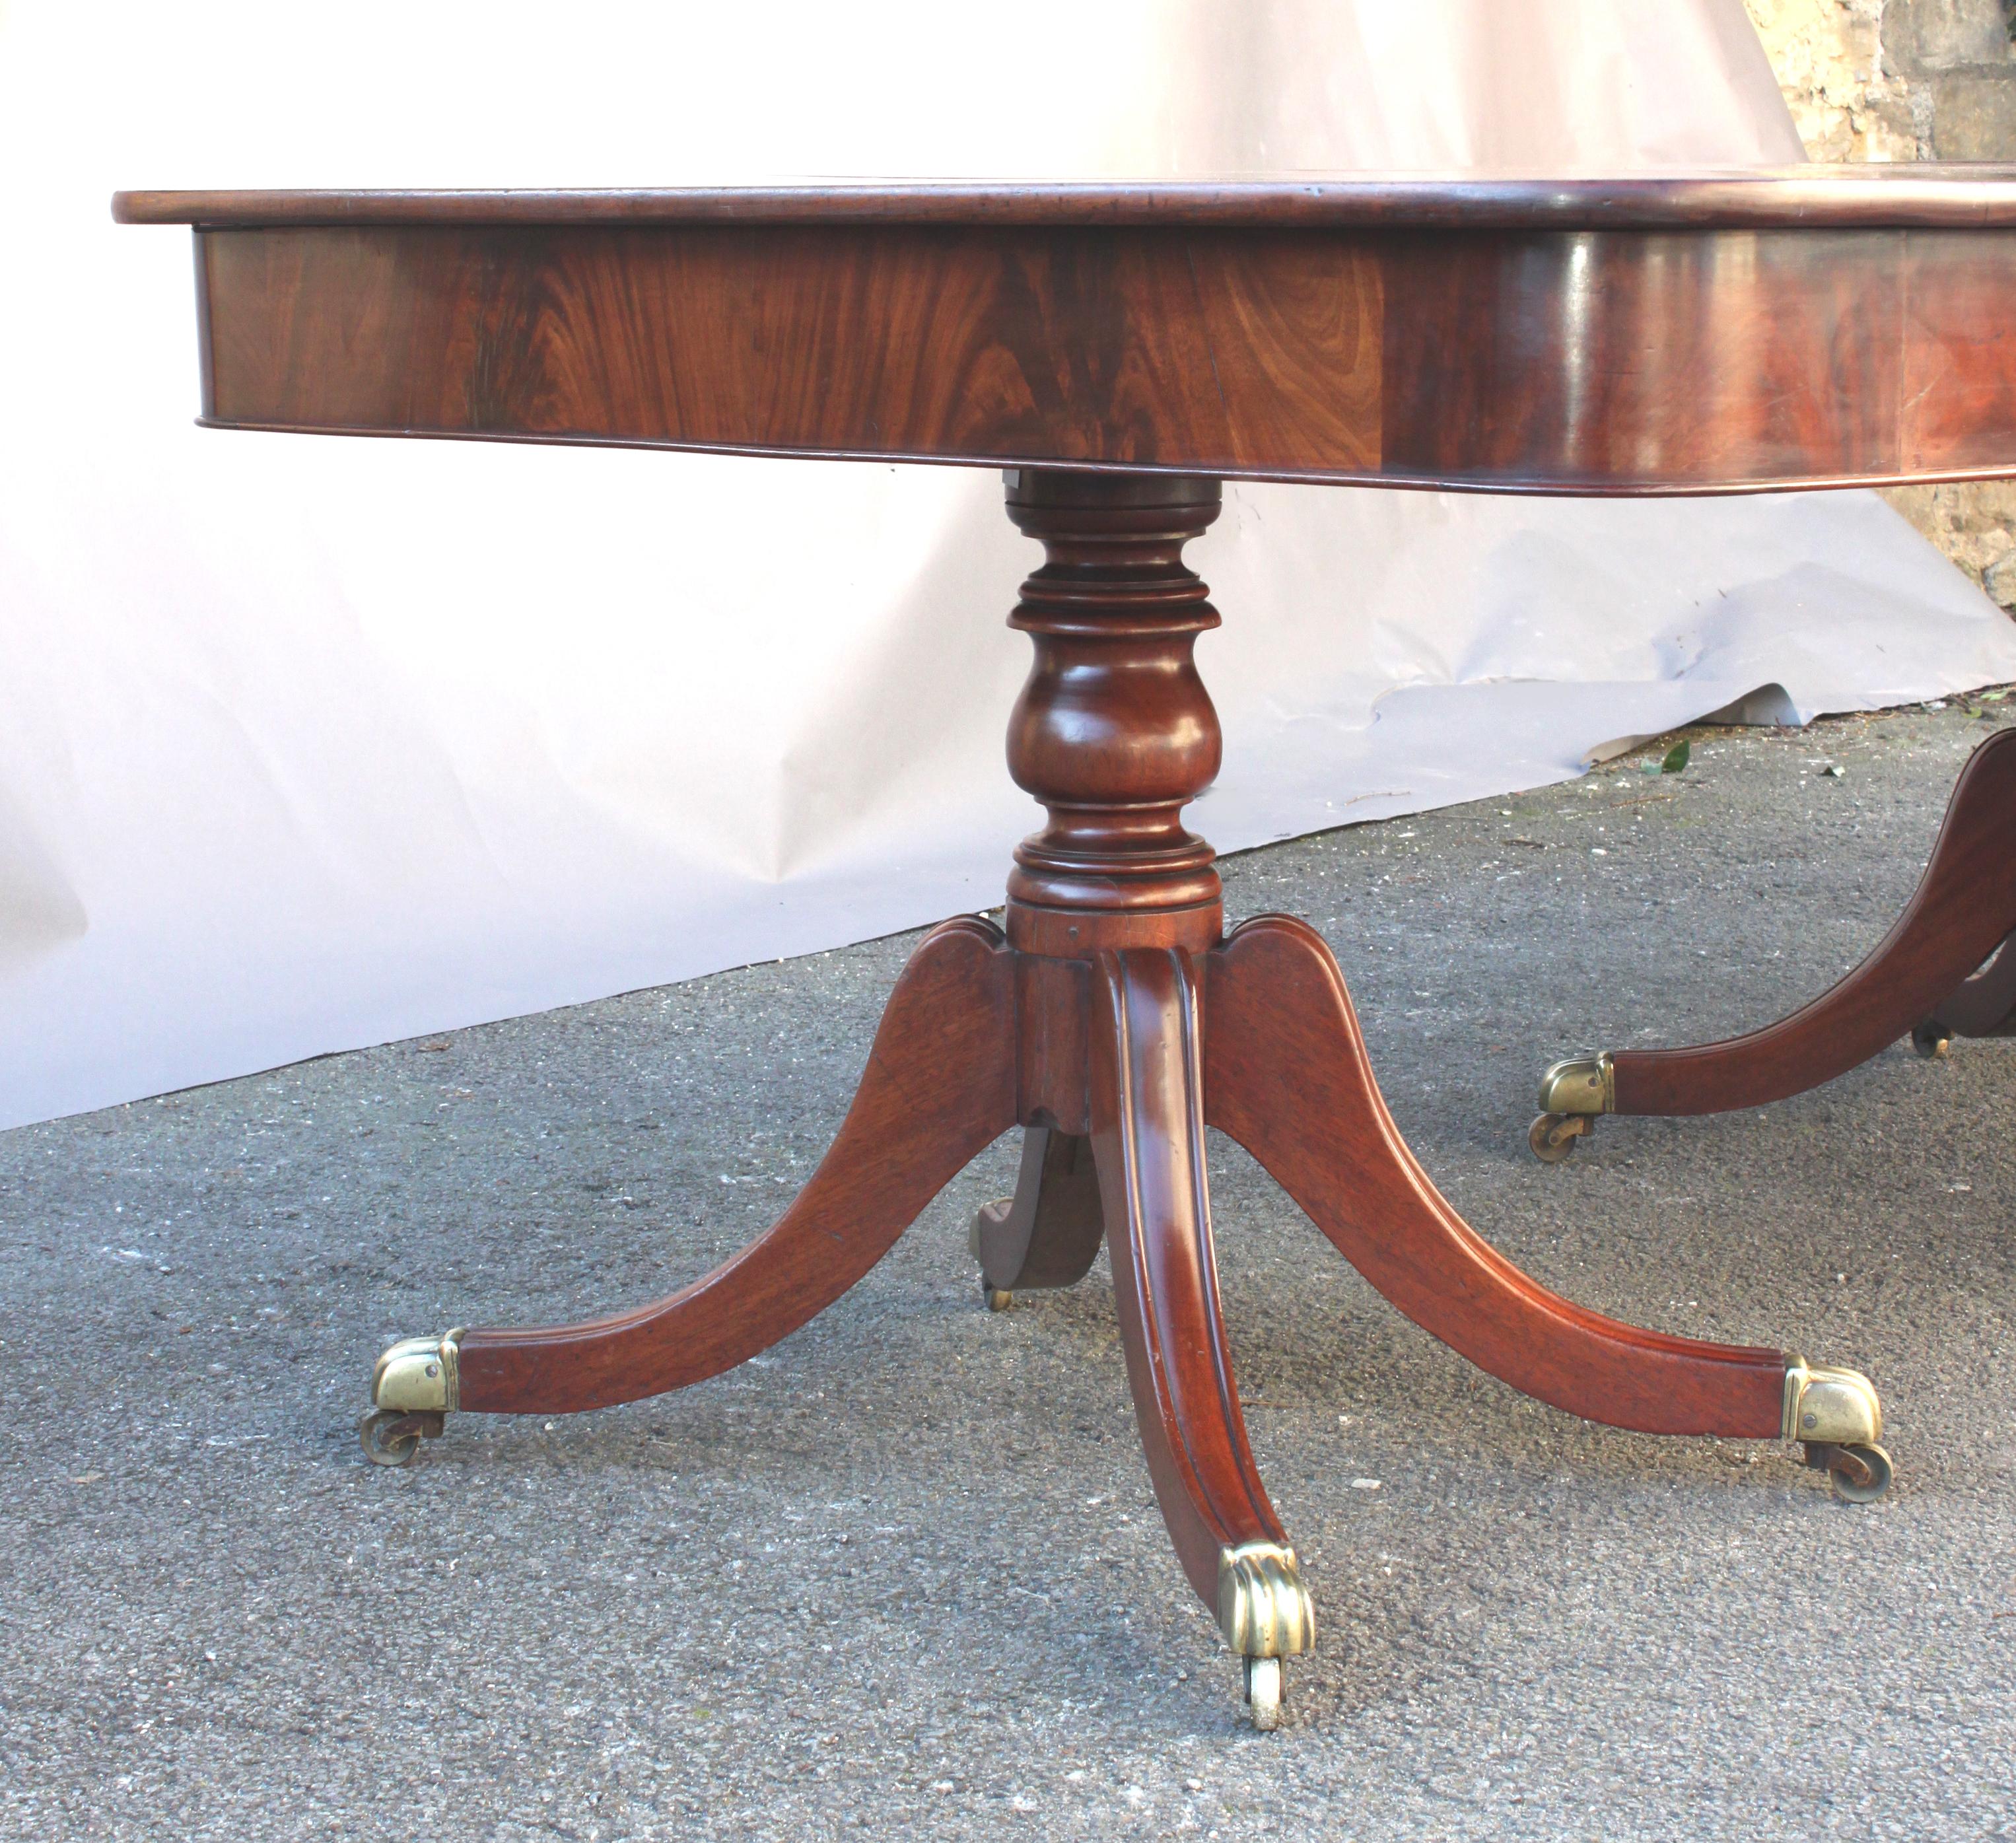 Regency Three Pillar Mahogany Dining Table In Good Condition For Sale In Bradford-on-Avon, Wiltshire